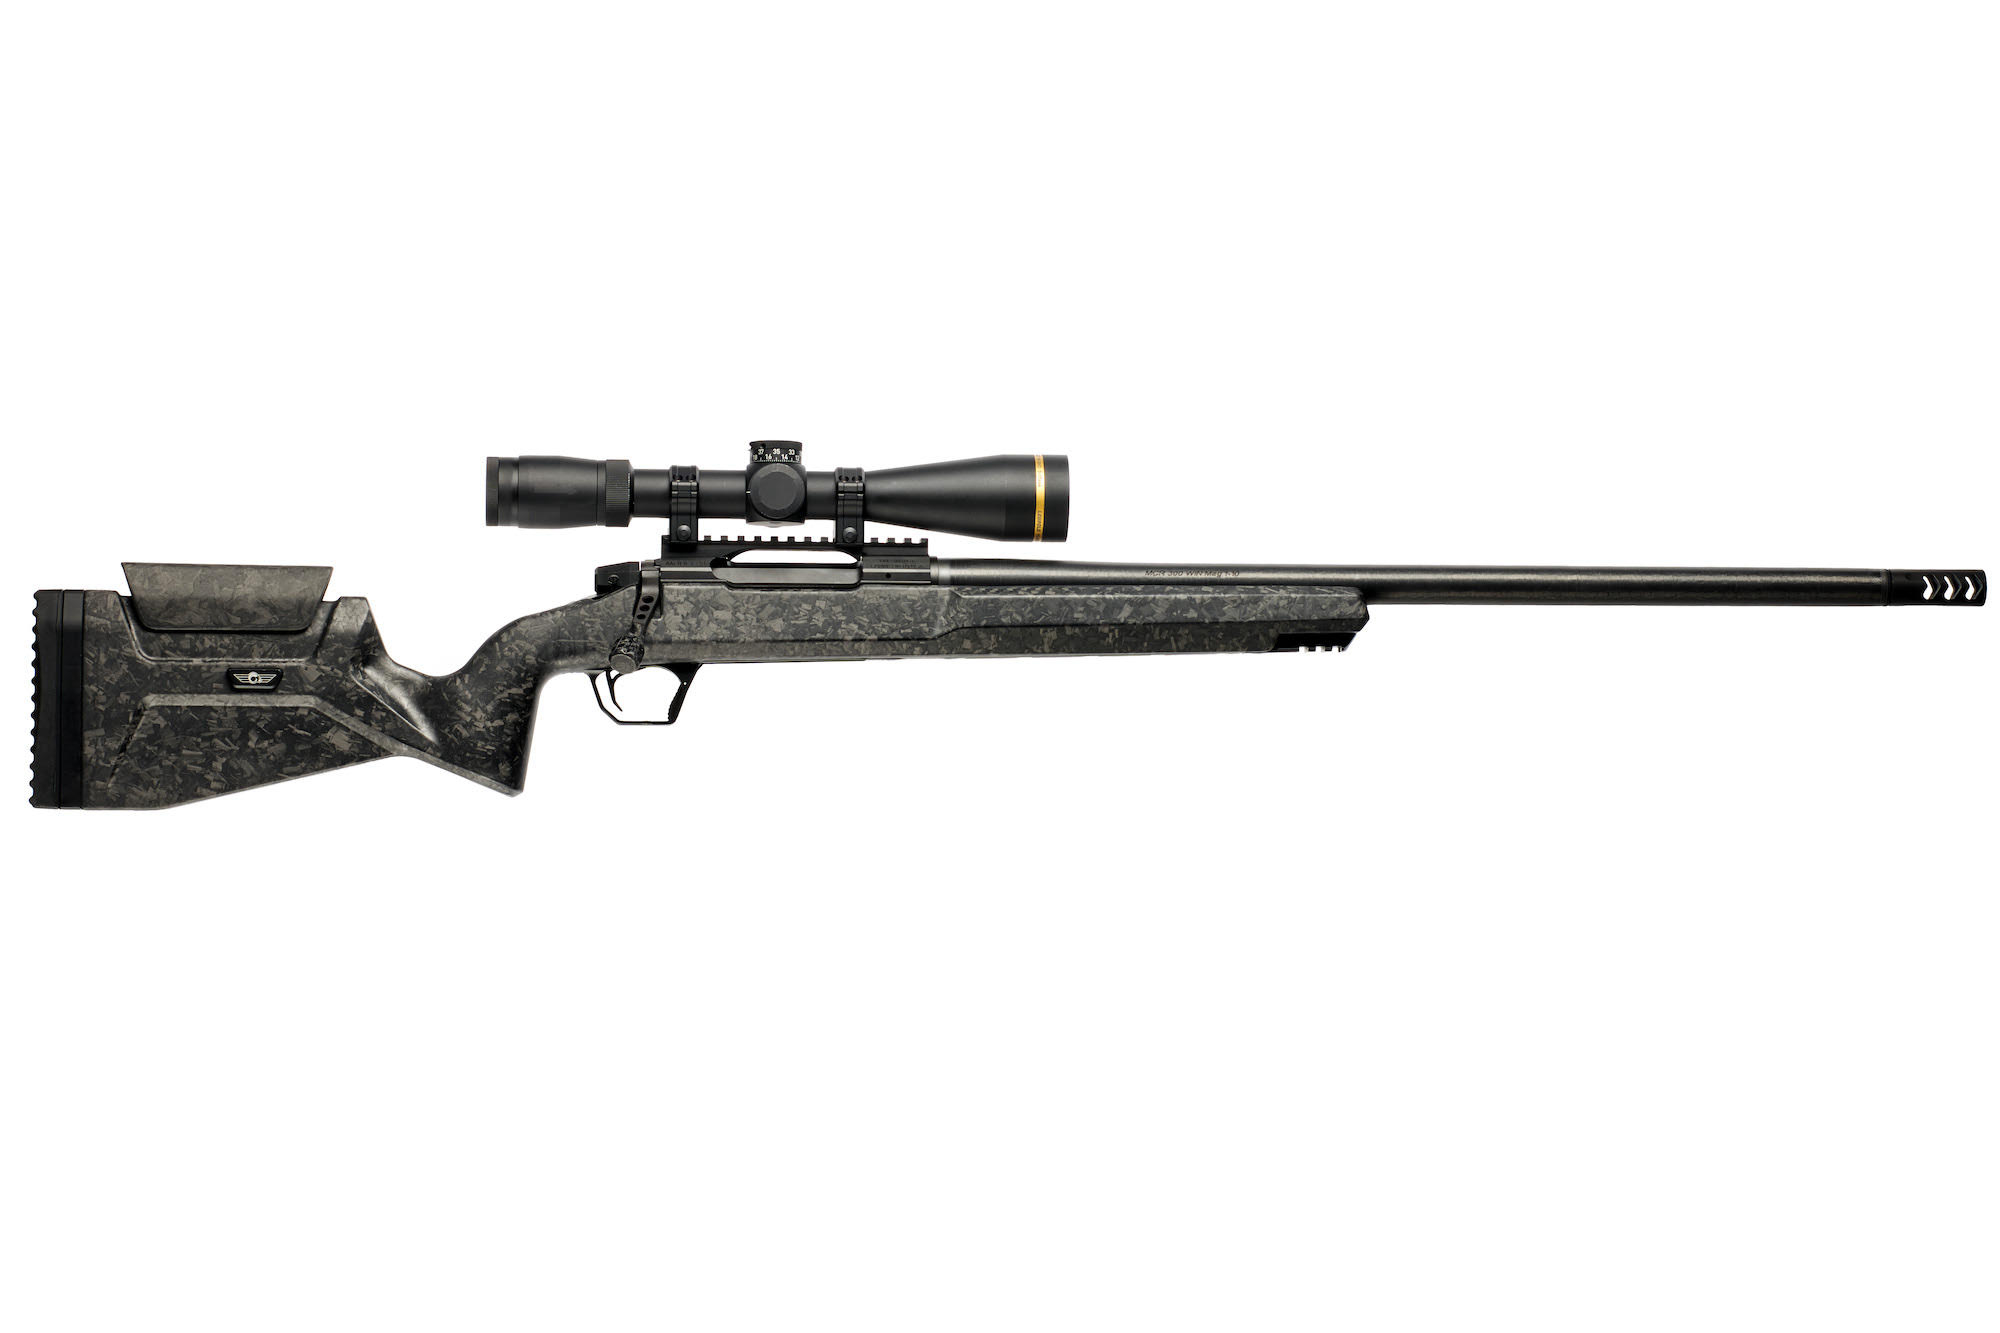 Christensen Arms Now Shipping Its New Modern Carbon Rifle